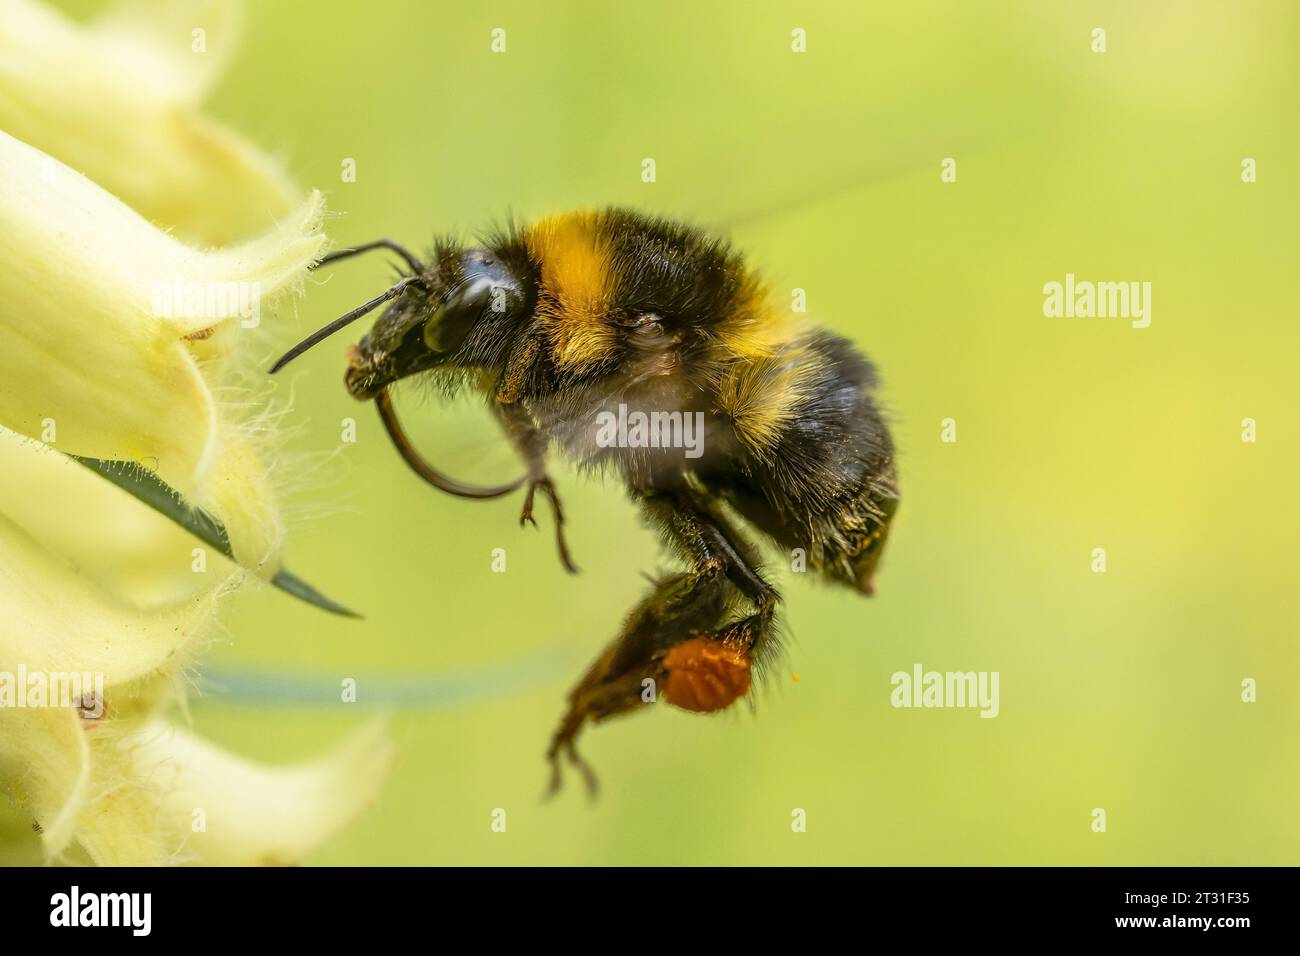 Bumblebee hovering in front of flower it is about to feed from, pollinating it in the process, garden, Kent, UK. Stock Photo